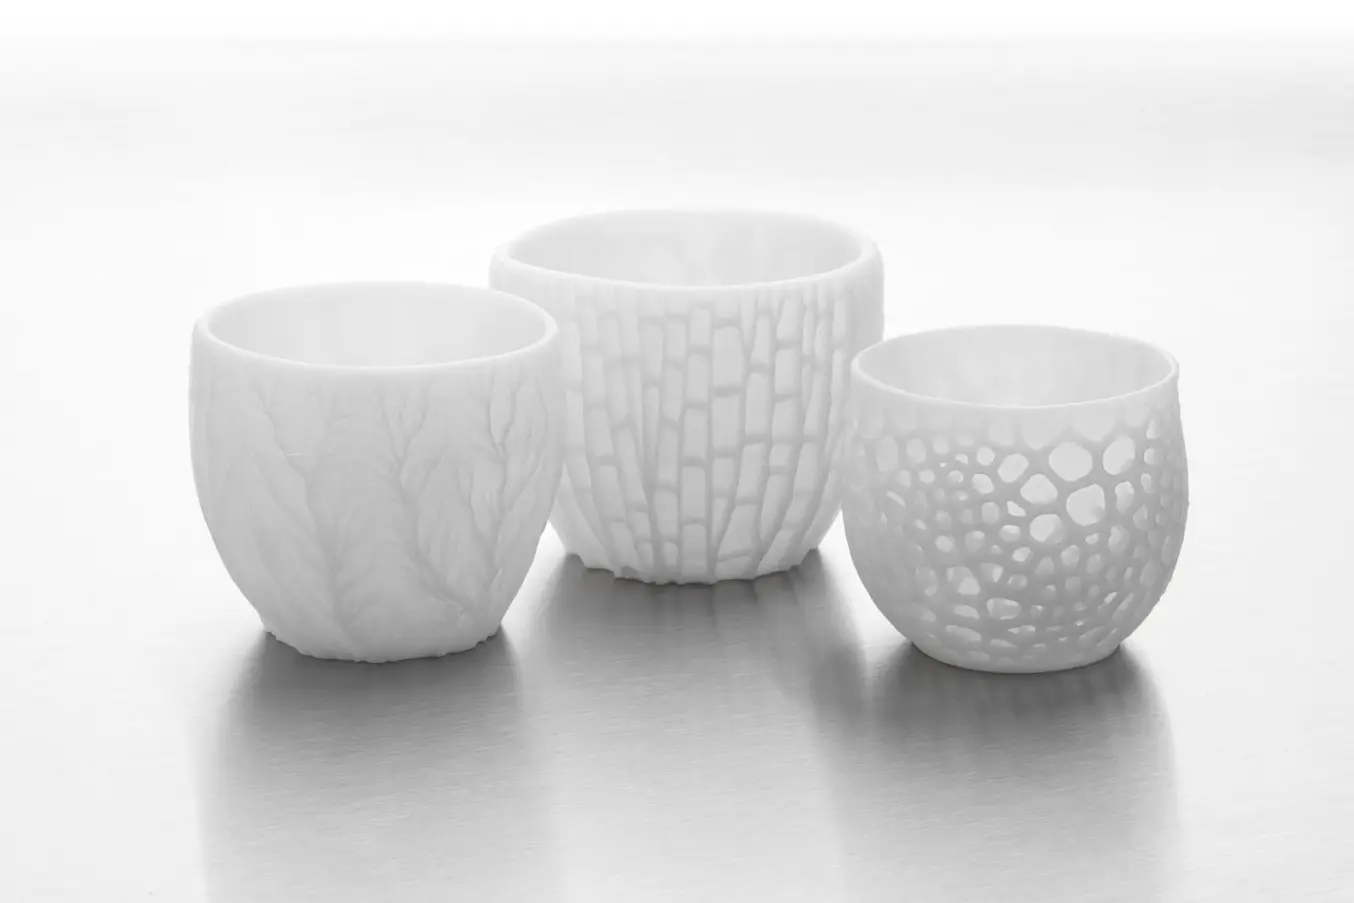 3D printing in ceramics is ideal for fabricating complex geometries that wouldn’t be possible by hand.